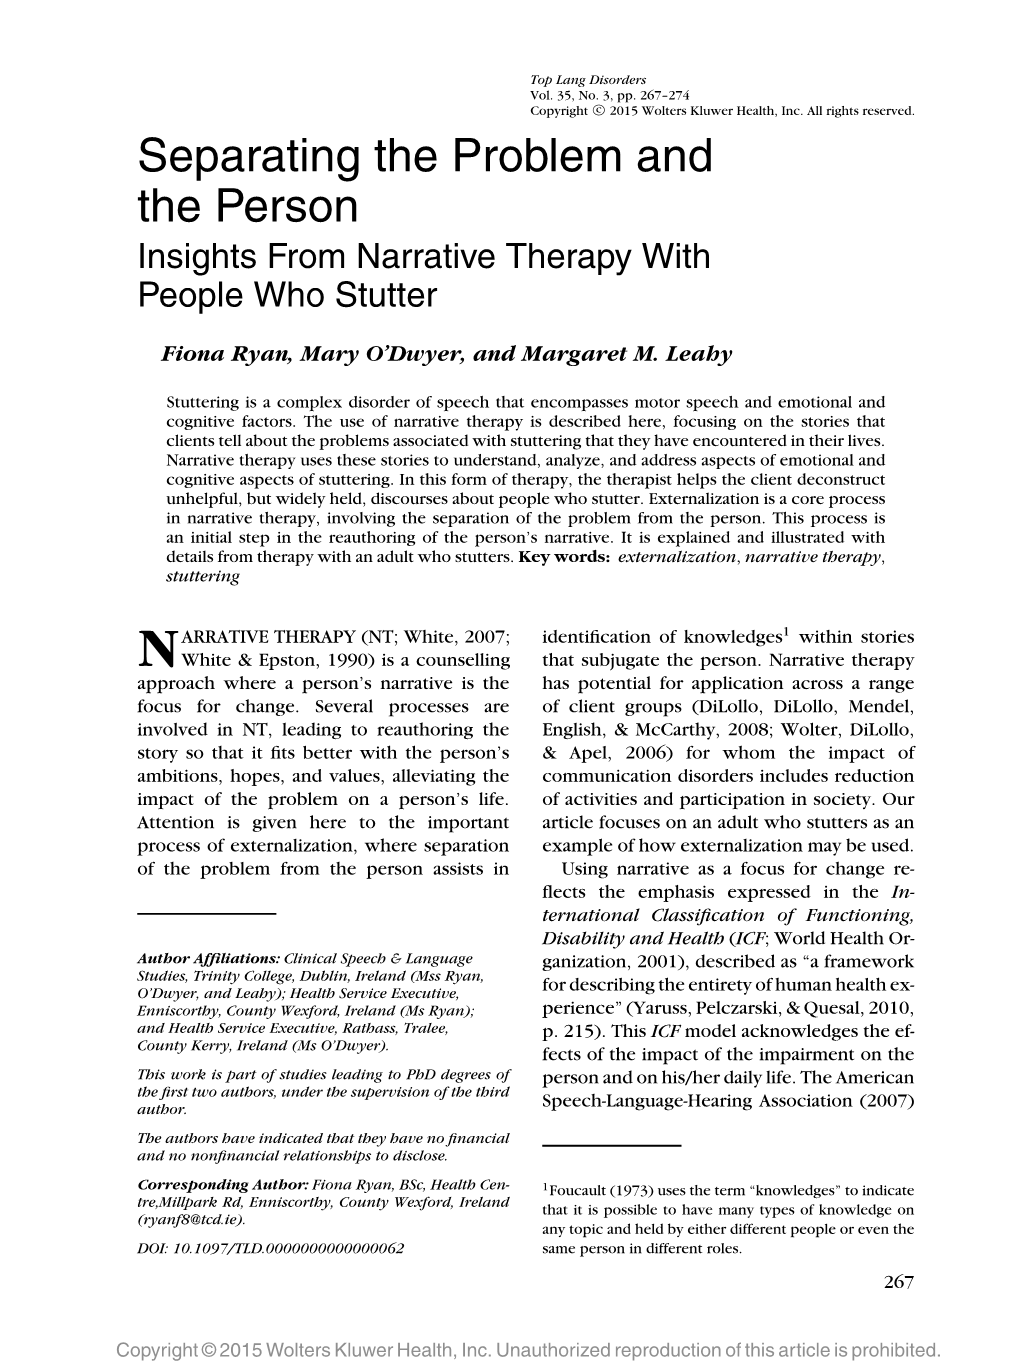 Separating the Problem and the Person Insights from Narrative Therapy with People Who Stutter